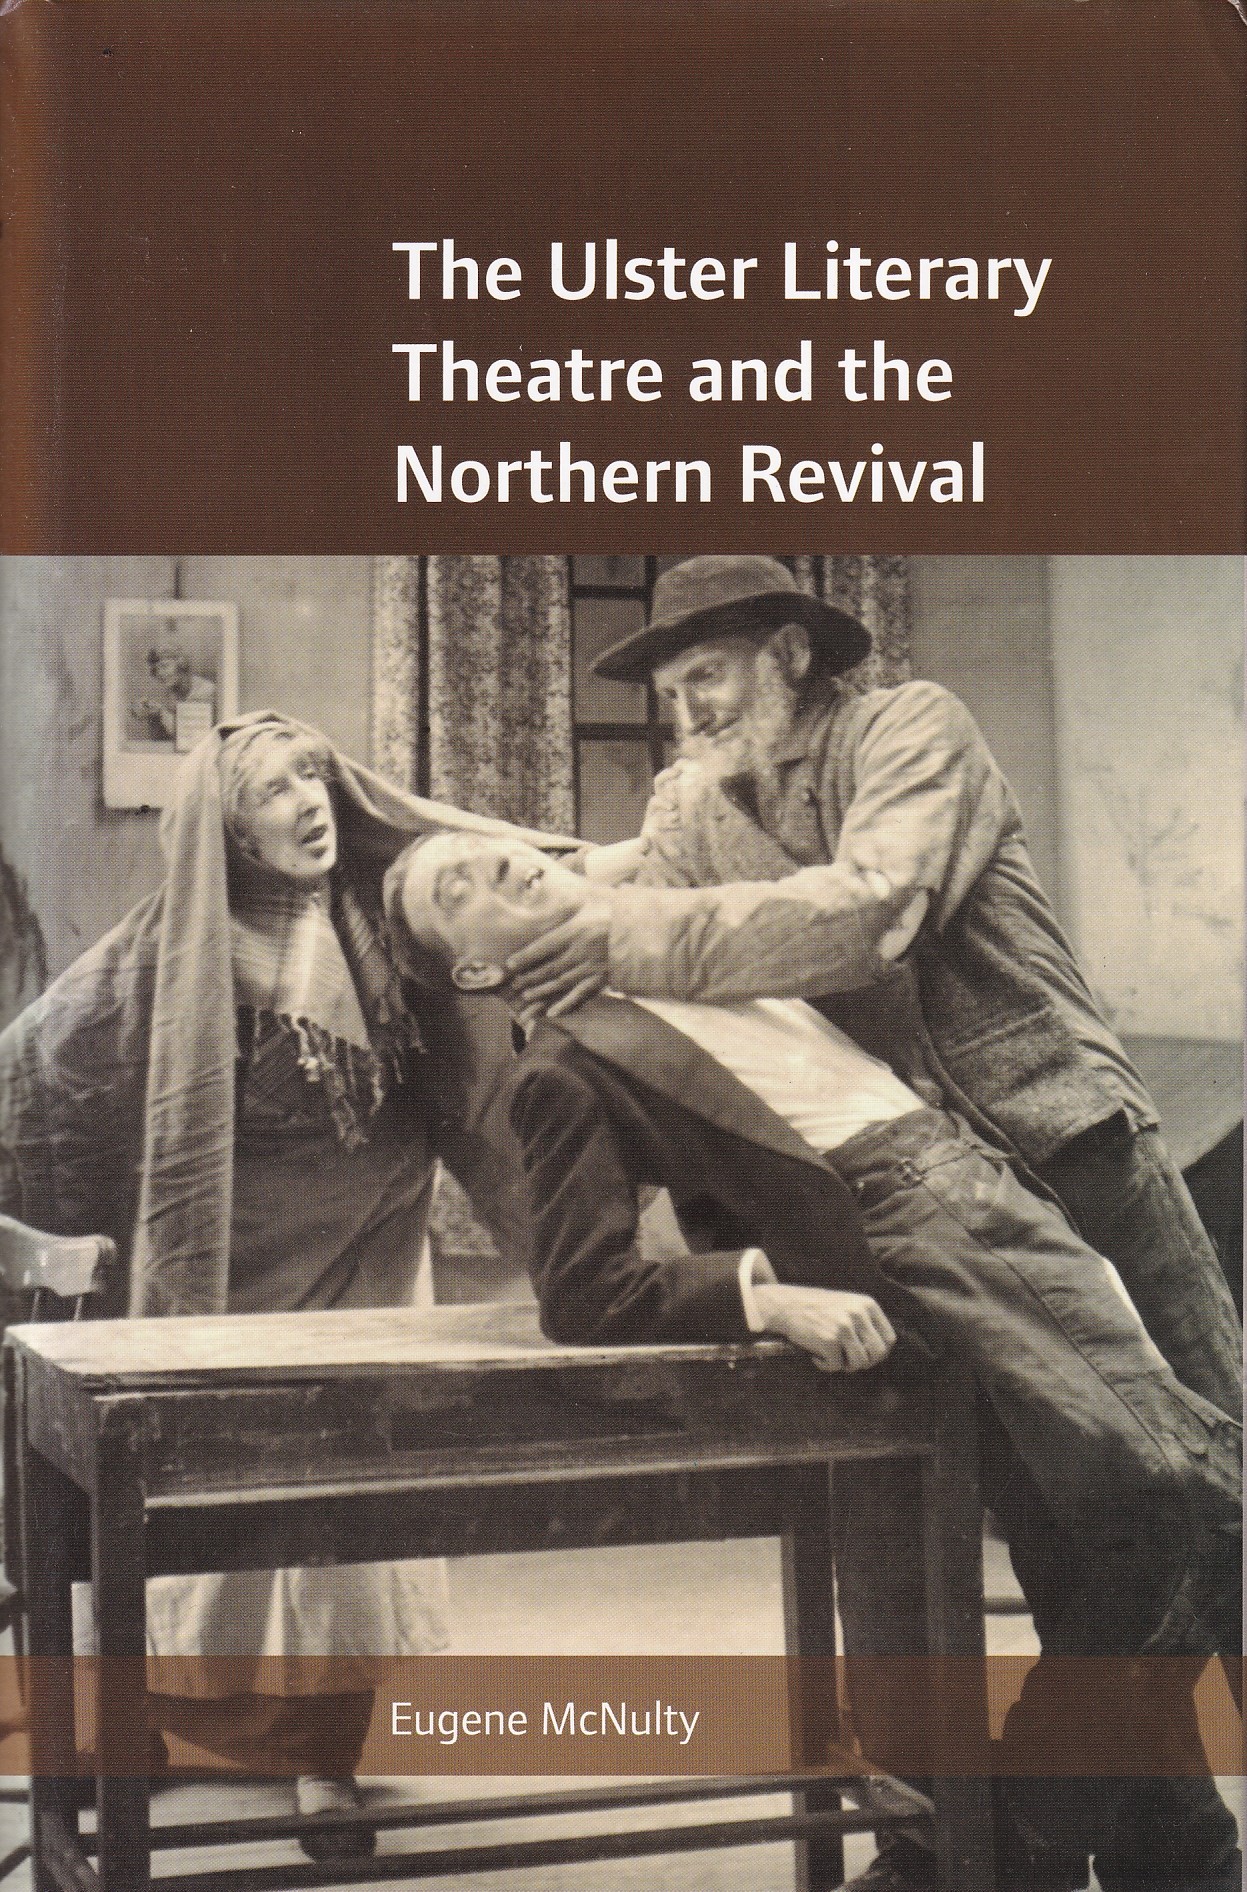 The Ulster Literary Theatre and the Northern Revival by Eugene McNulty